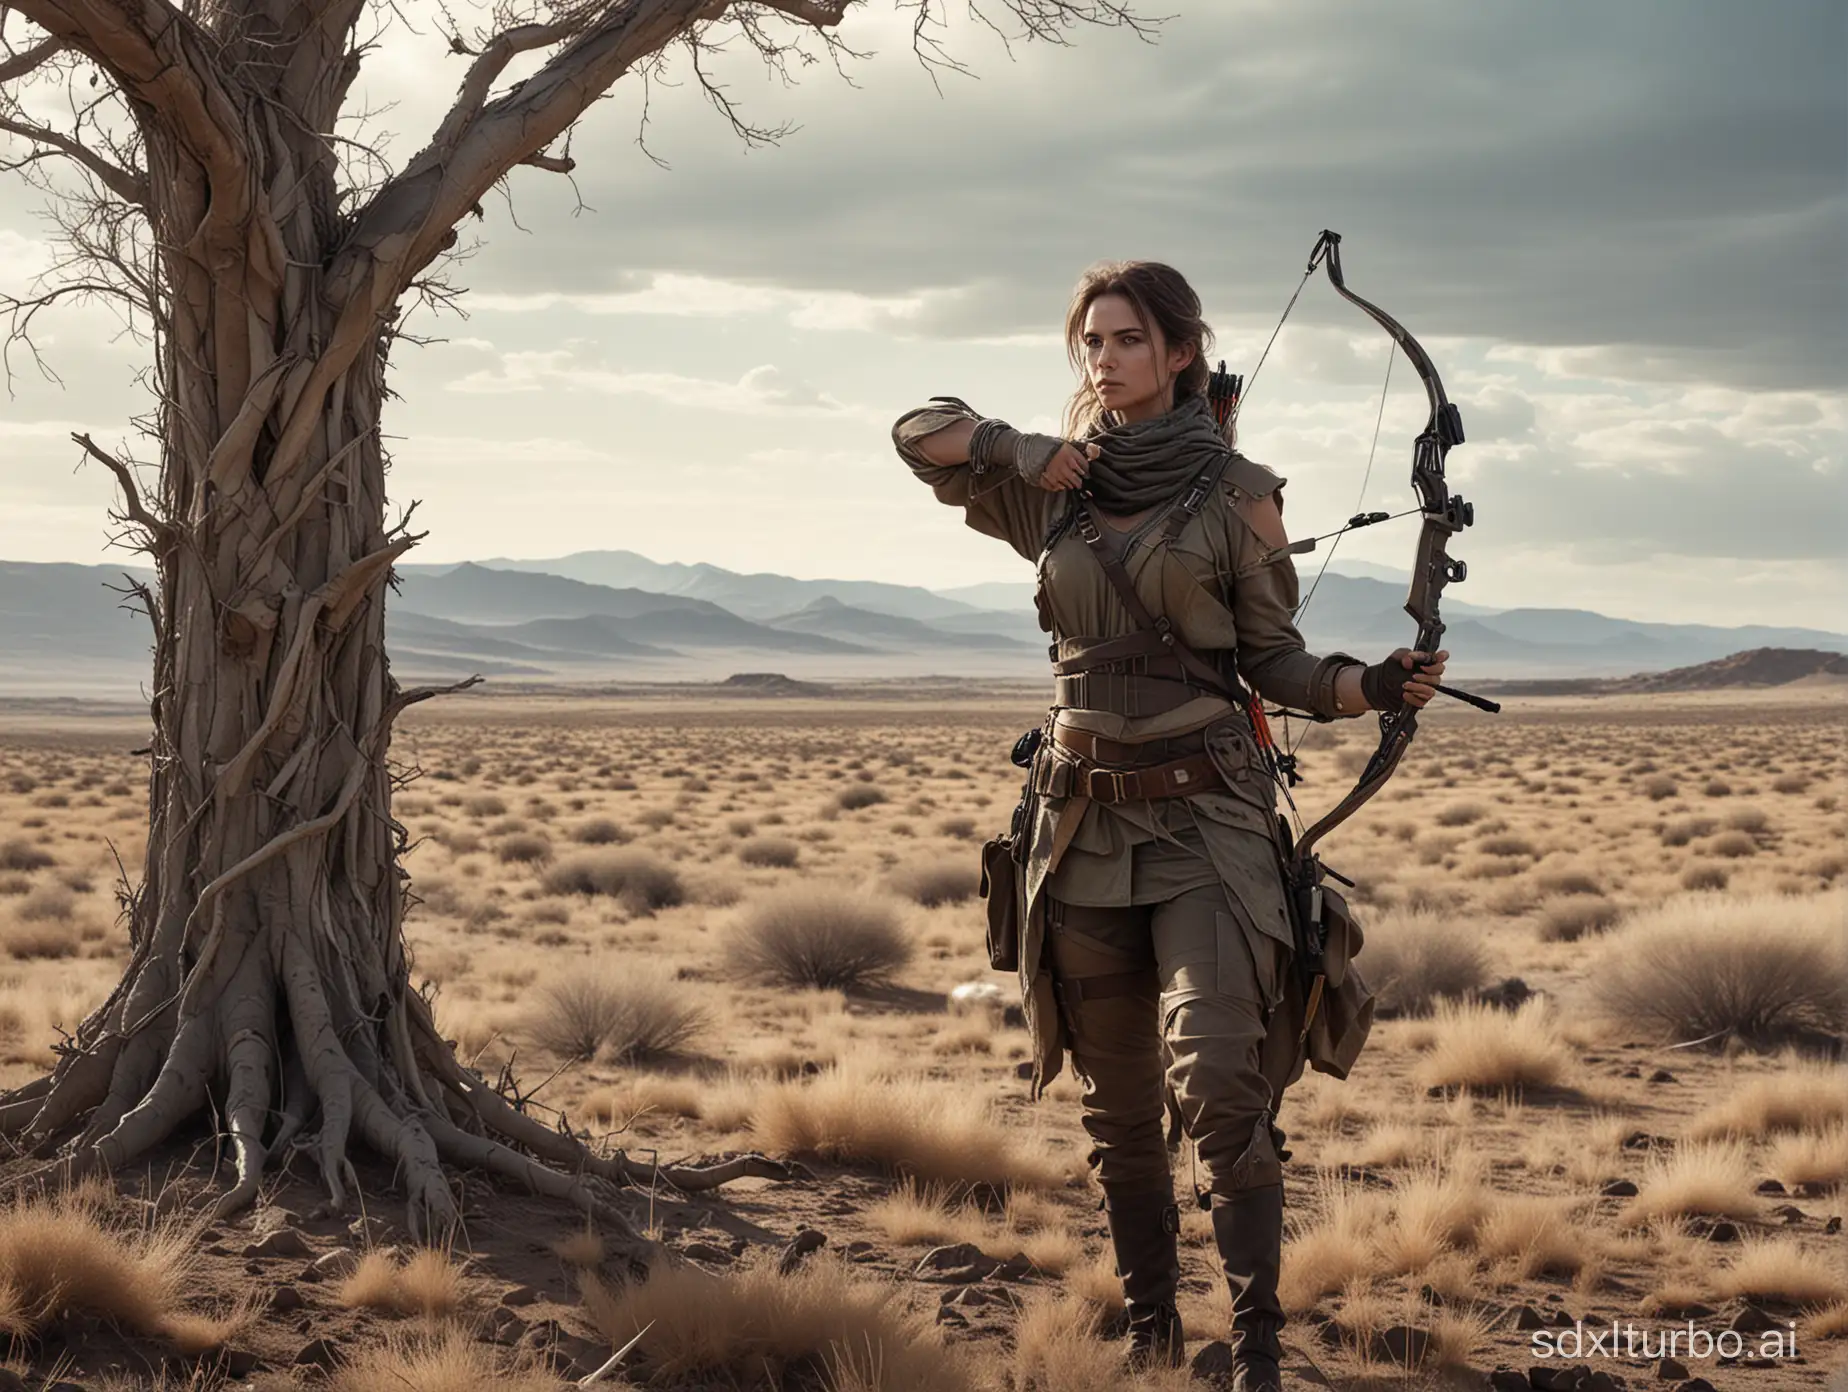 Mysterious-Woman-with-Compound-Bow-in-Desolate-Wasteland